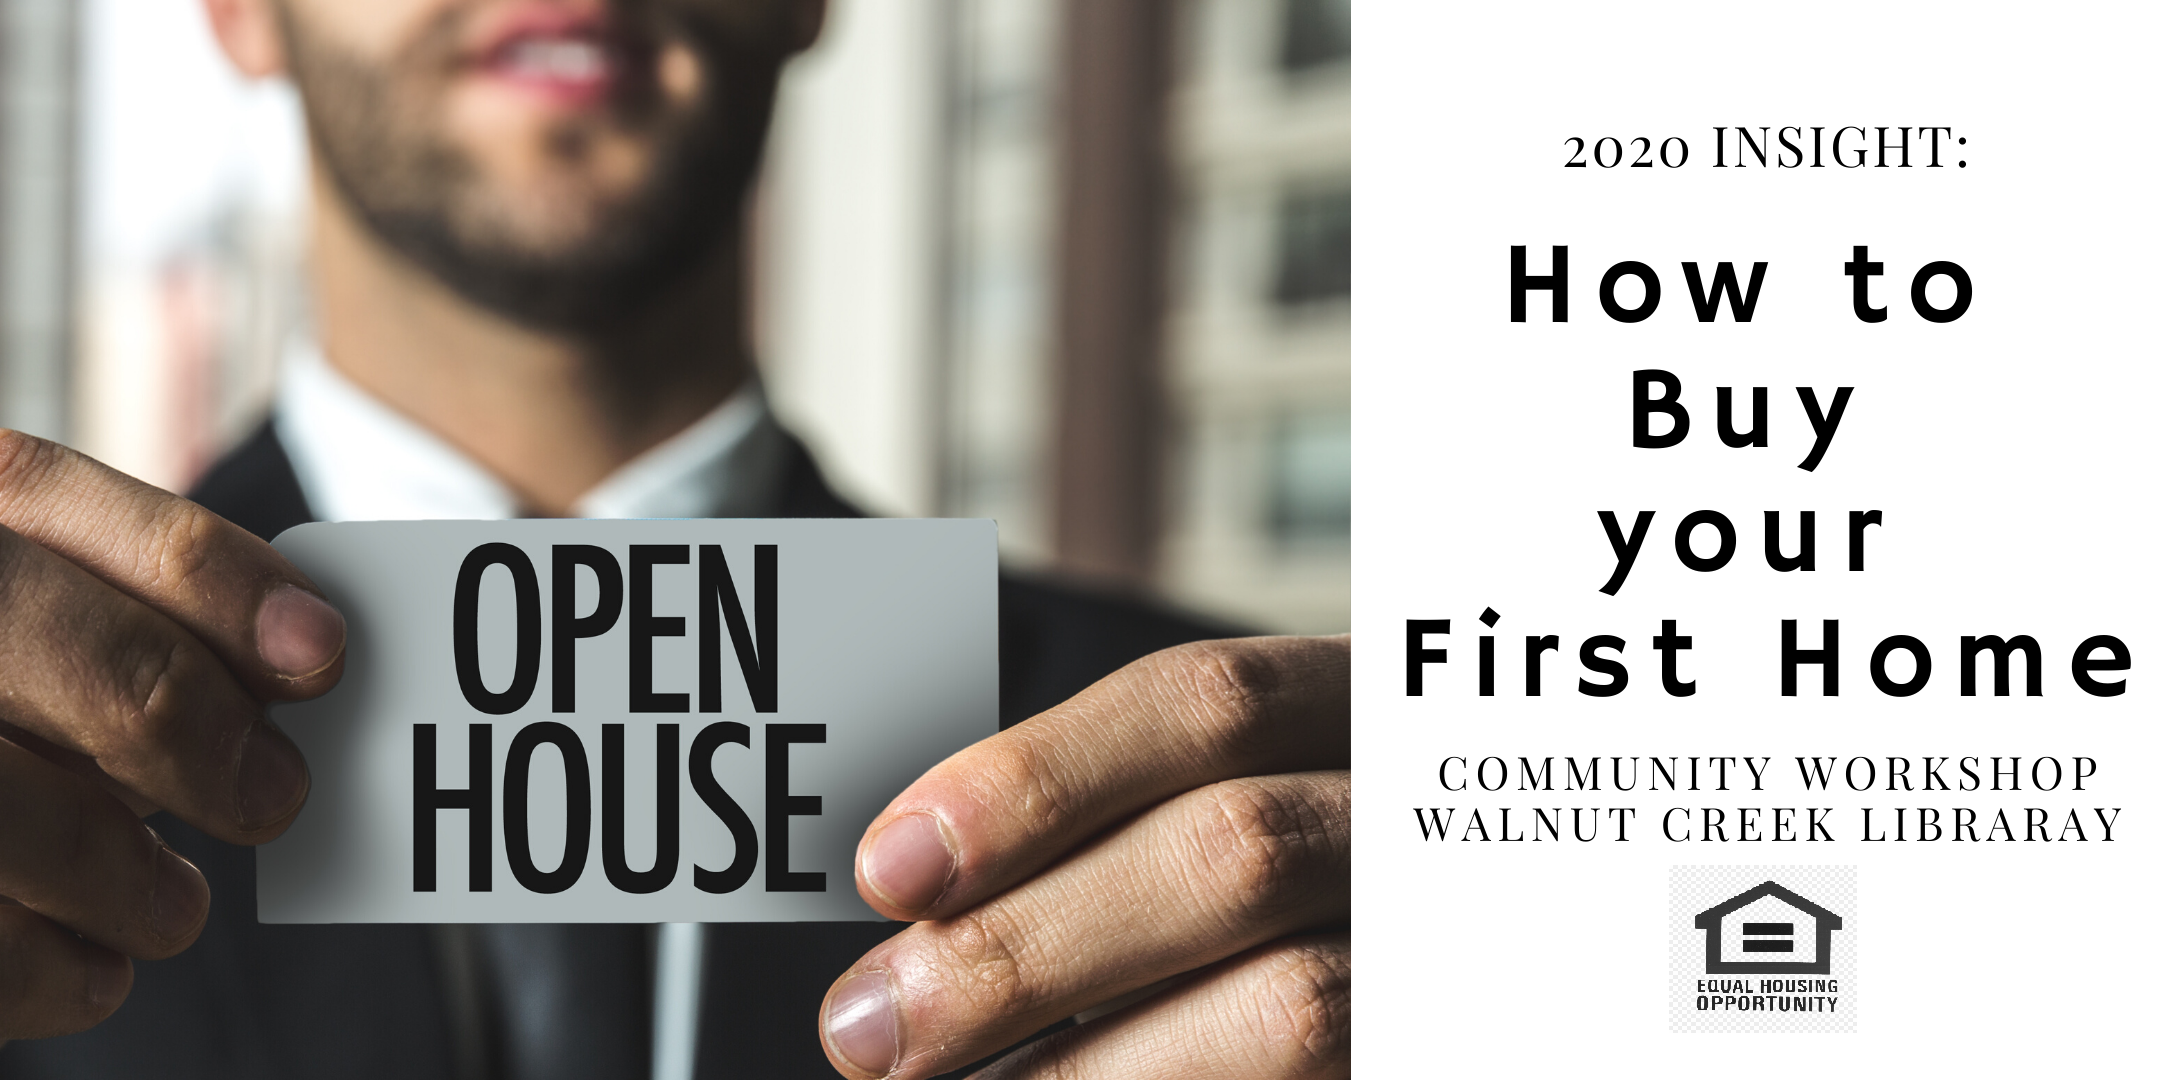 How to Buy your First Home! Community Workshop 2020